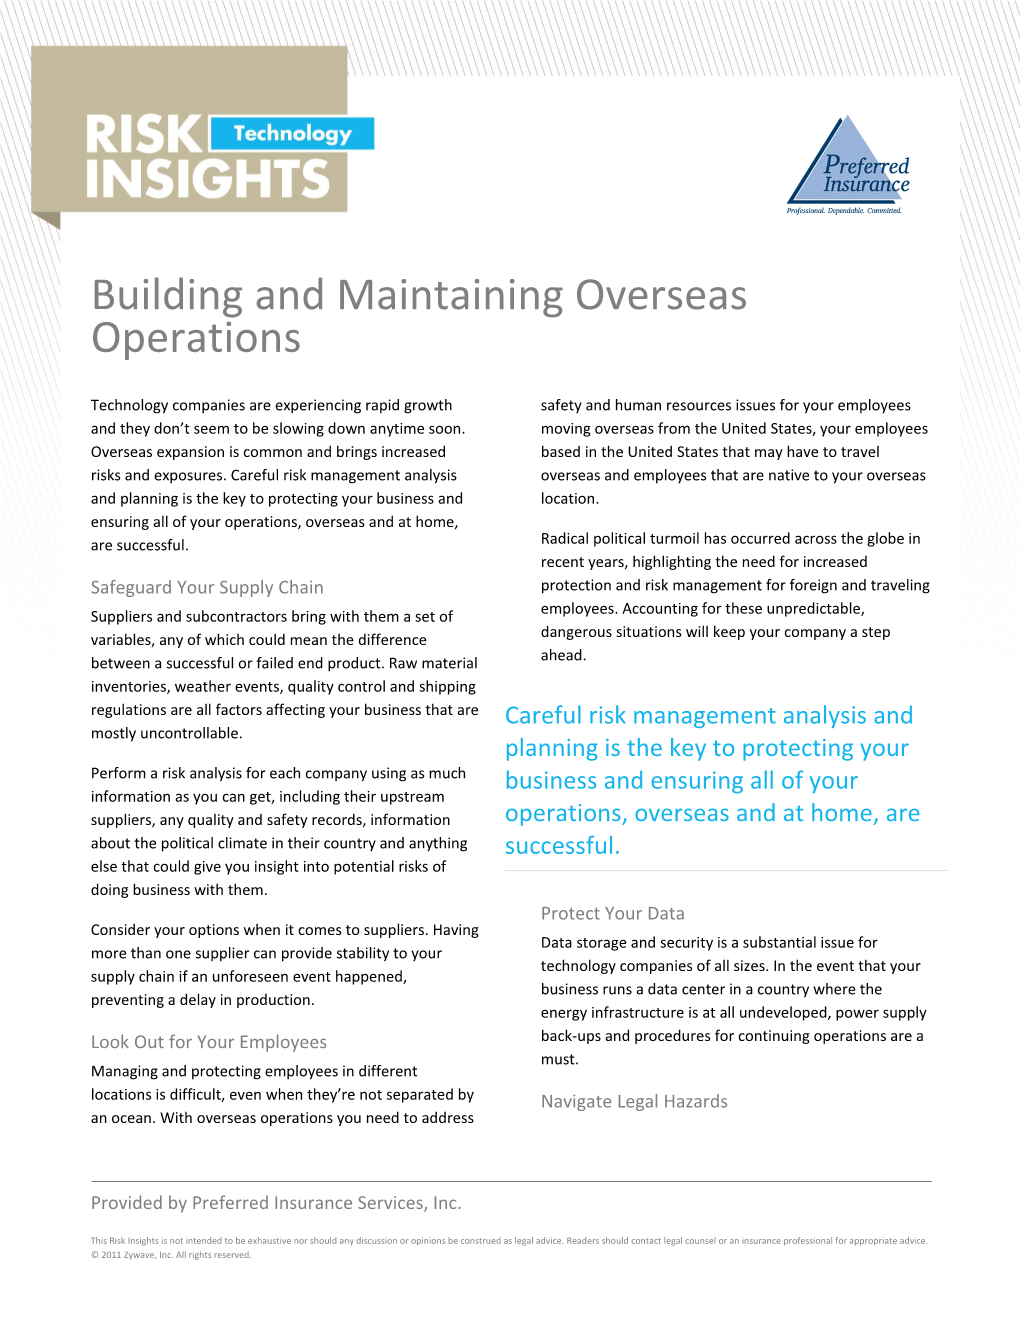 Building and Maintaining Overseas Operations